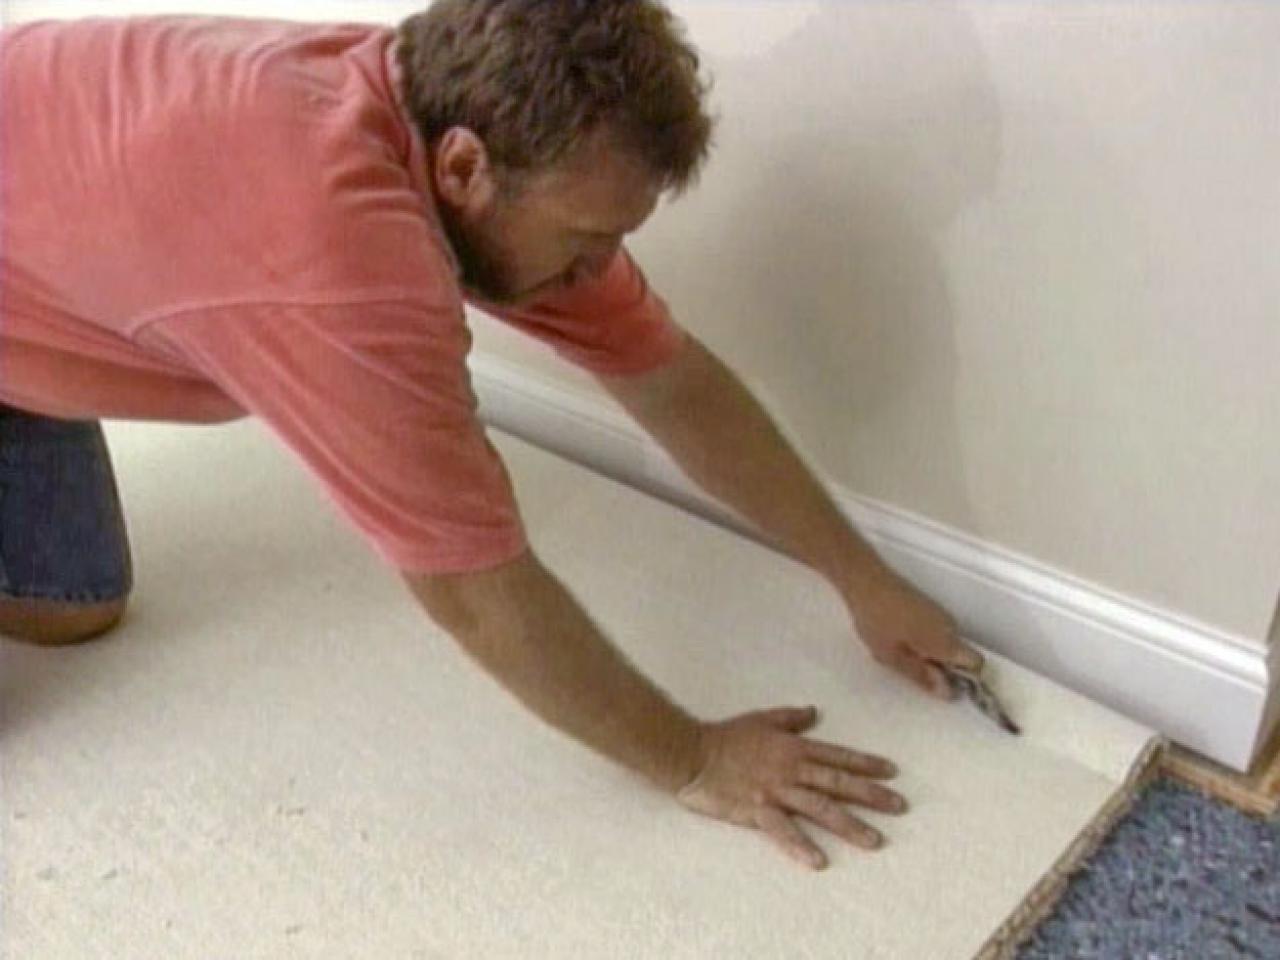 Install Wall-to-Wall Carpet Yourself